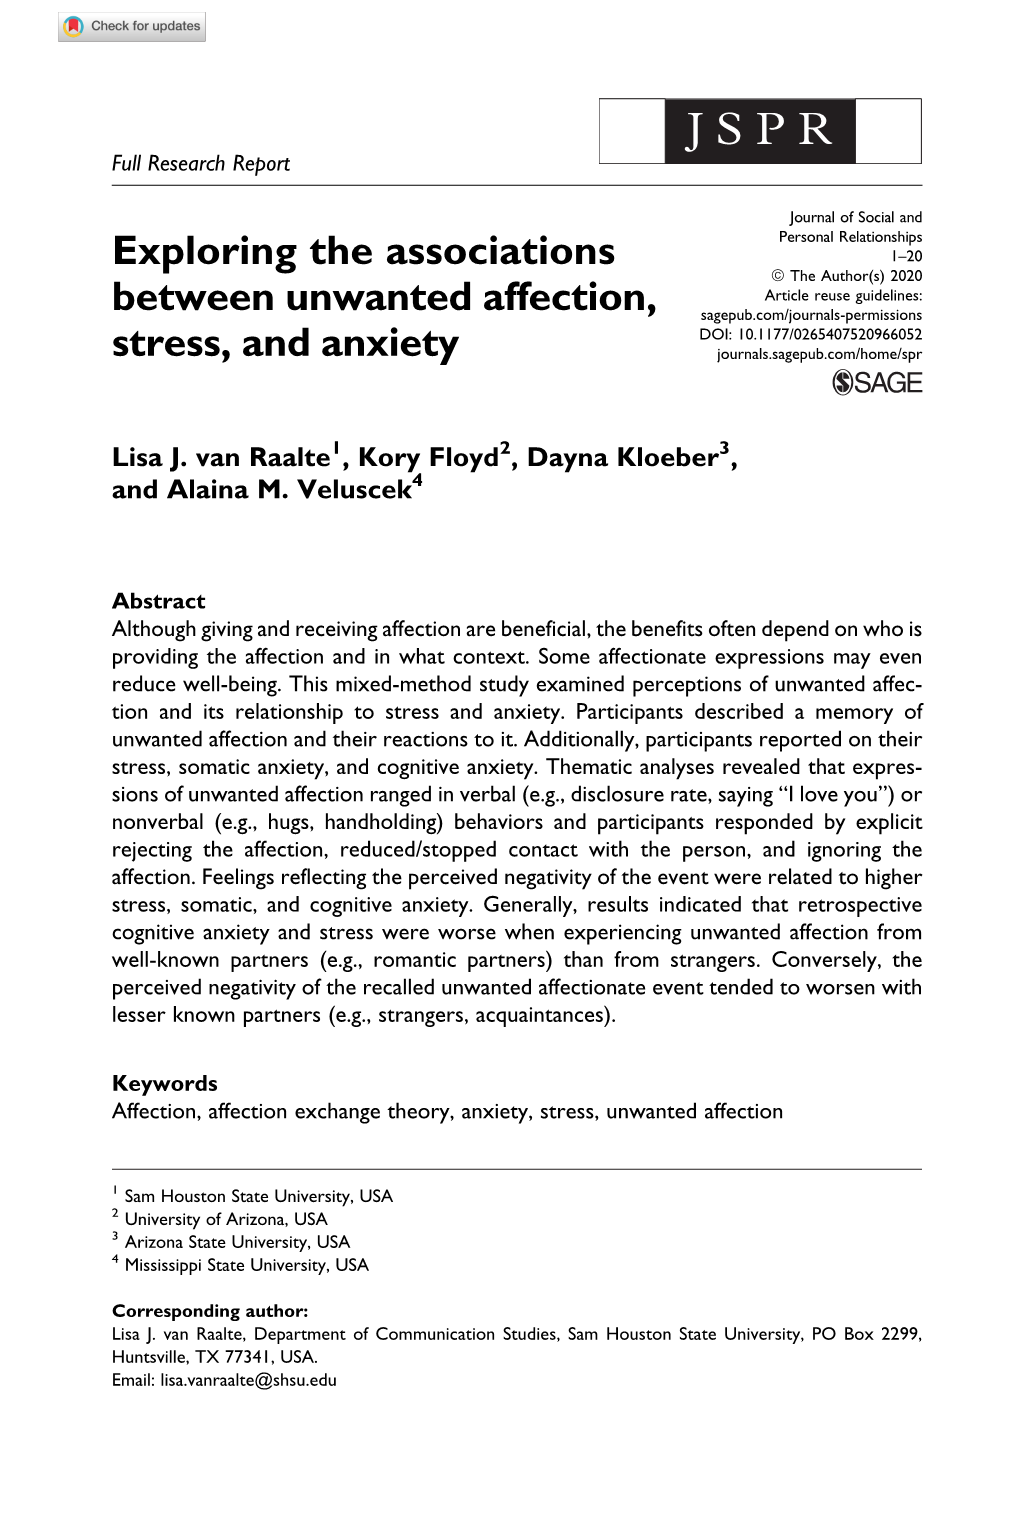 Exploring the Associations Between Unwanted Affection, Stress, And